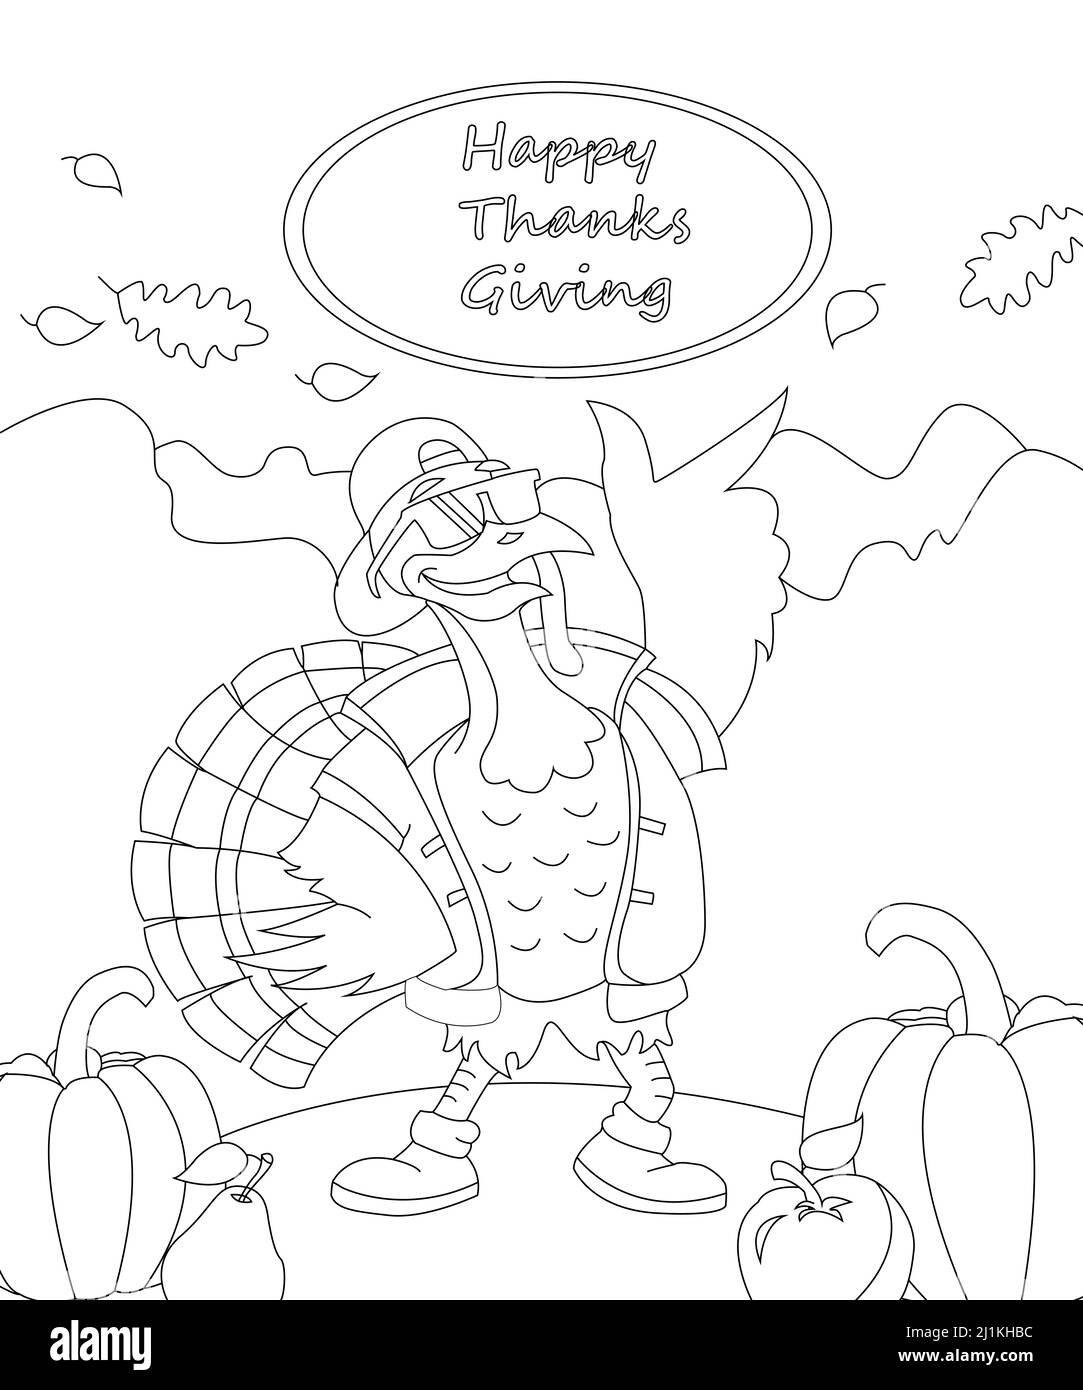 Thanks Giving Coloring Page For kids and aduls Stock Photo